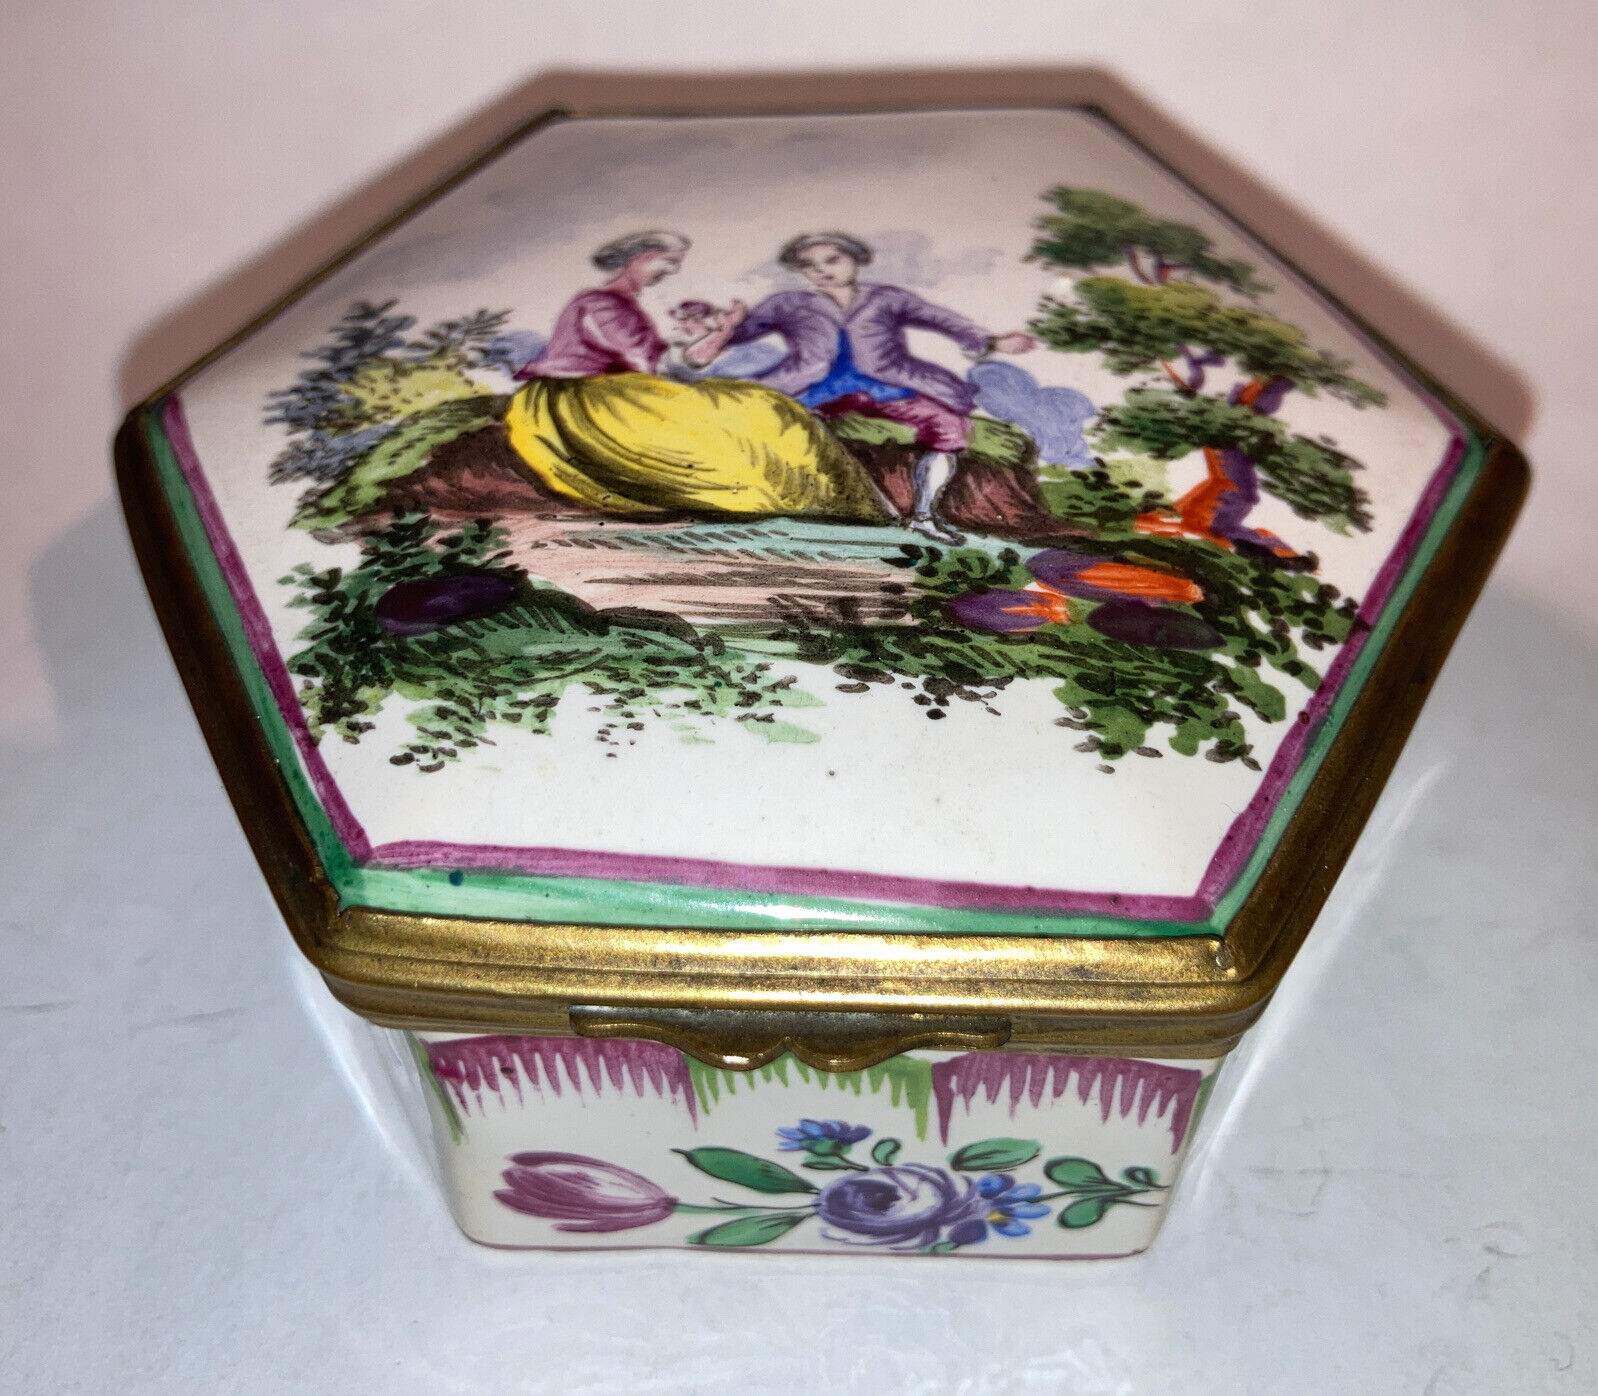 Rare Antique Circa 1750’s French Sceaux Faience Porcelain Tricked Hexagonal Box